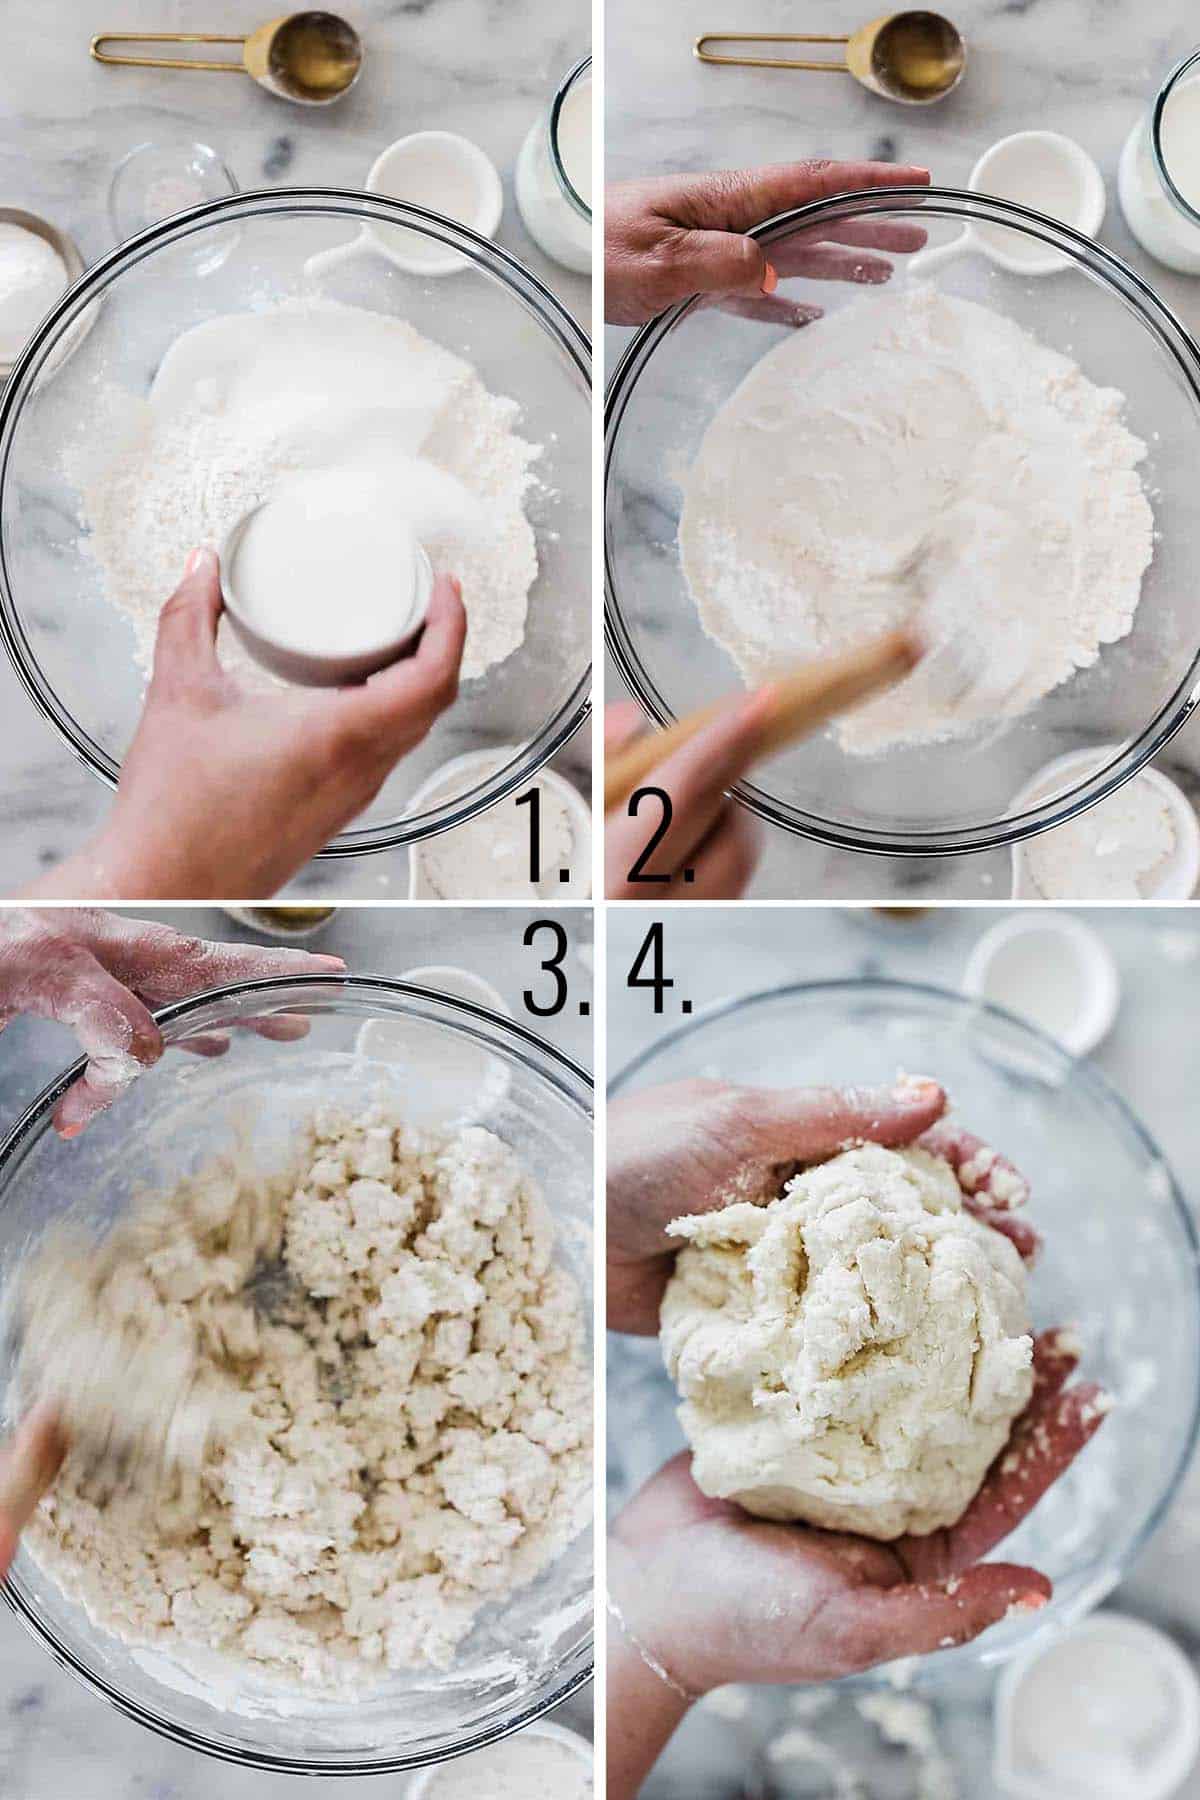 A collage of images showing the steps for making the dough for the shortcakes.